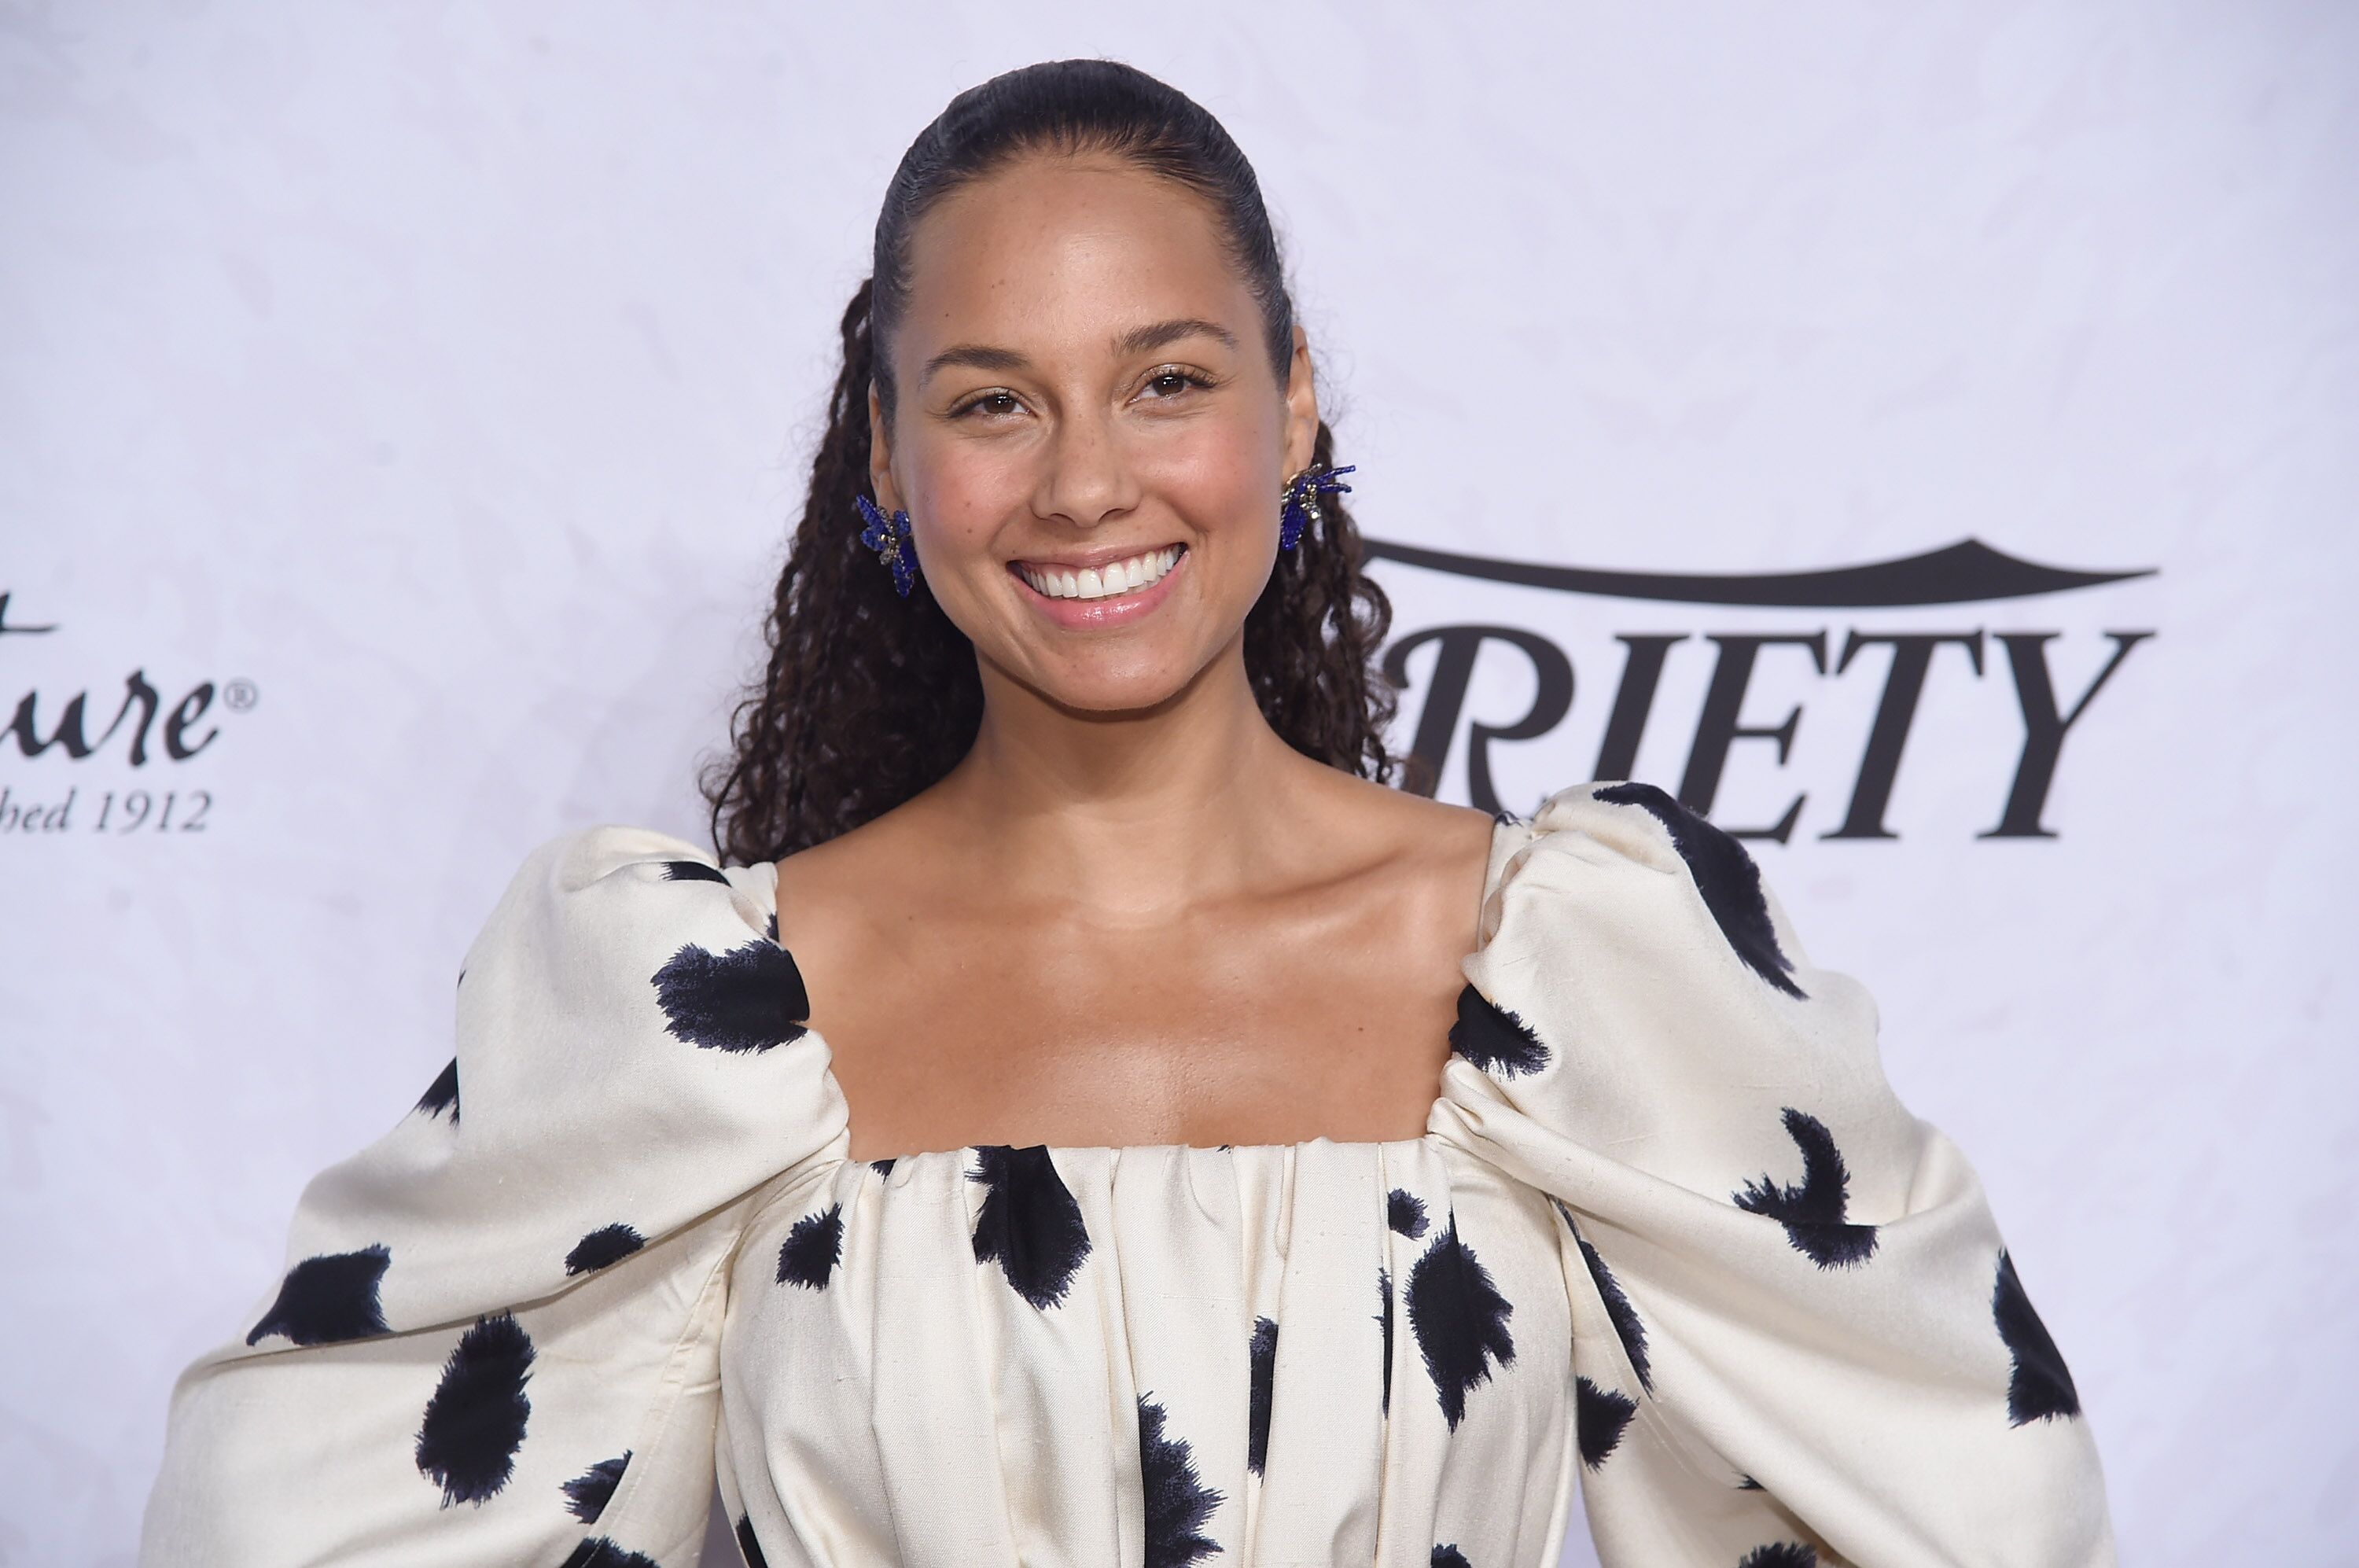 Singer/songwriter Alicia Keys at a Variety Magazine event/ Source: Getty Images